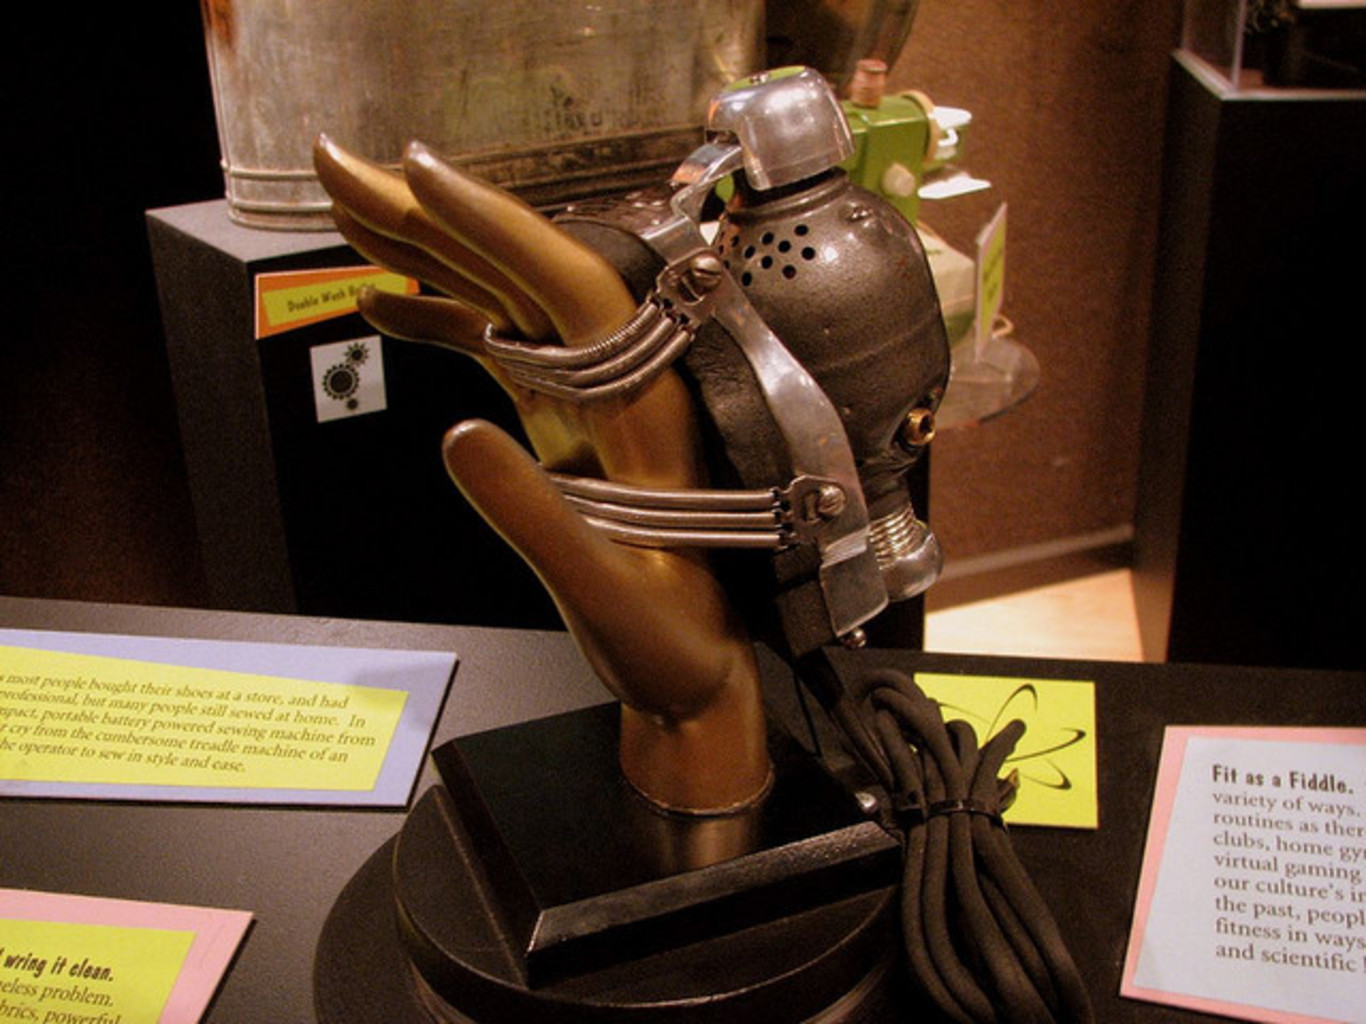 An early version of a vibrator.